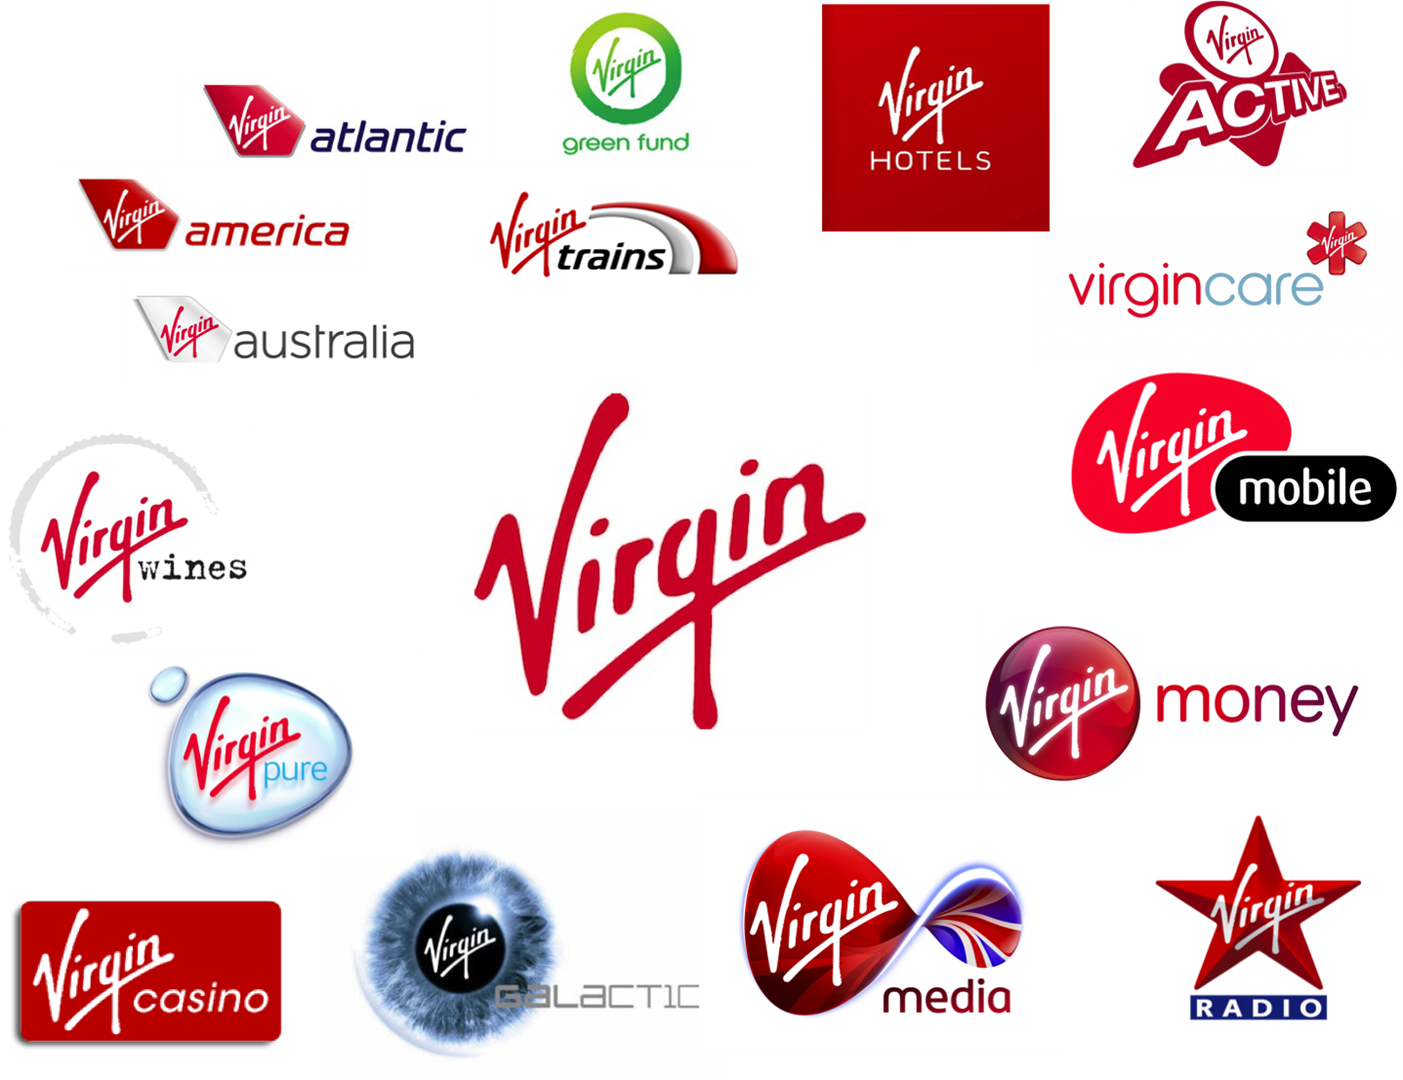 Virgin - Brand Extension or Brand Dilution?